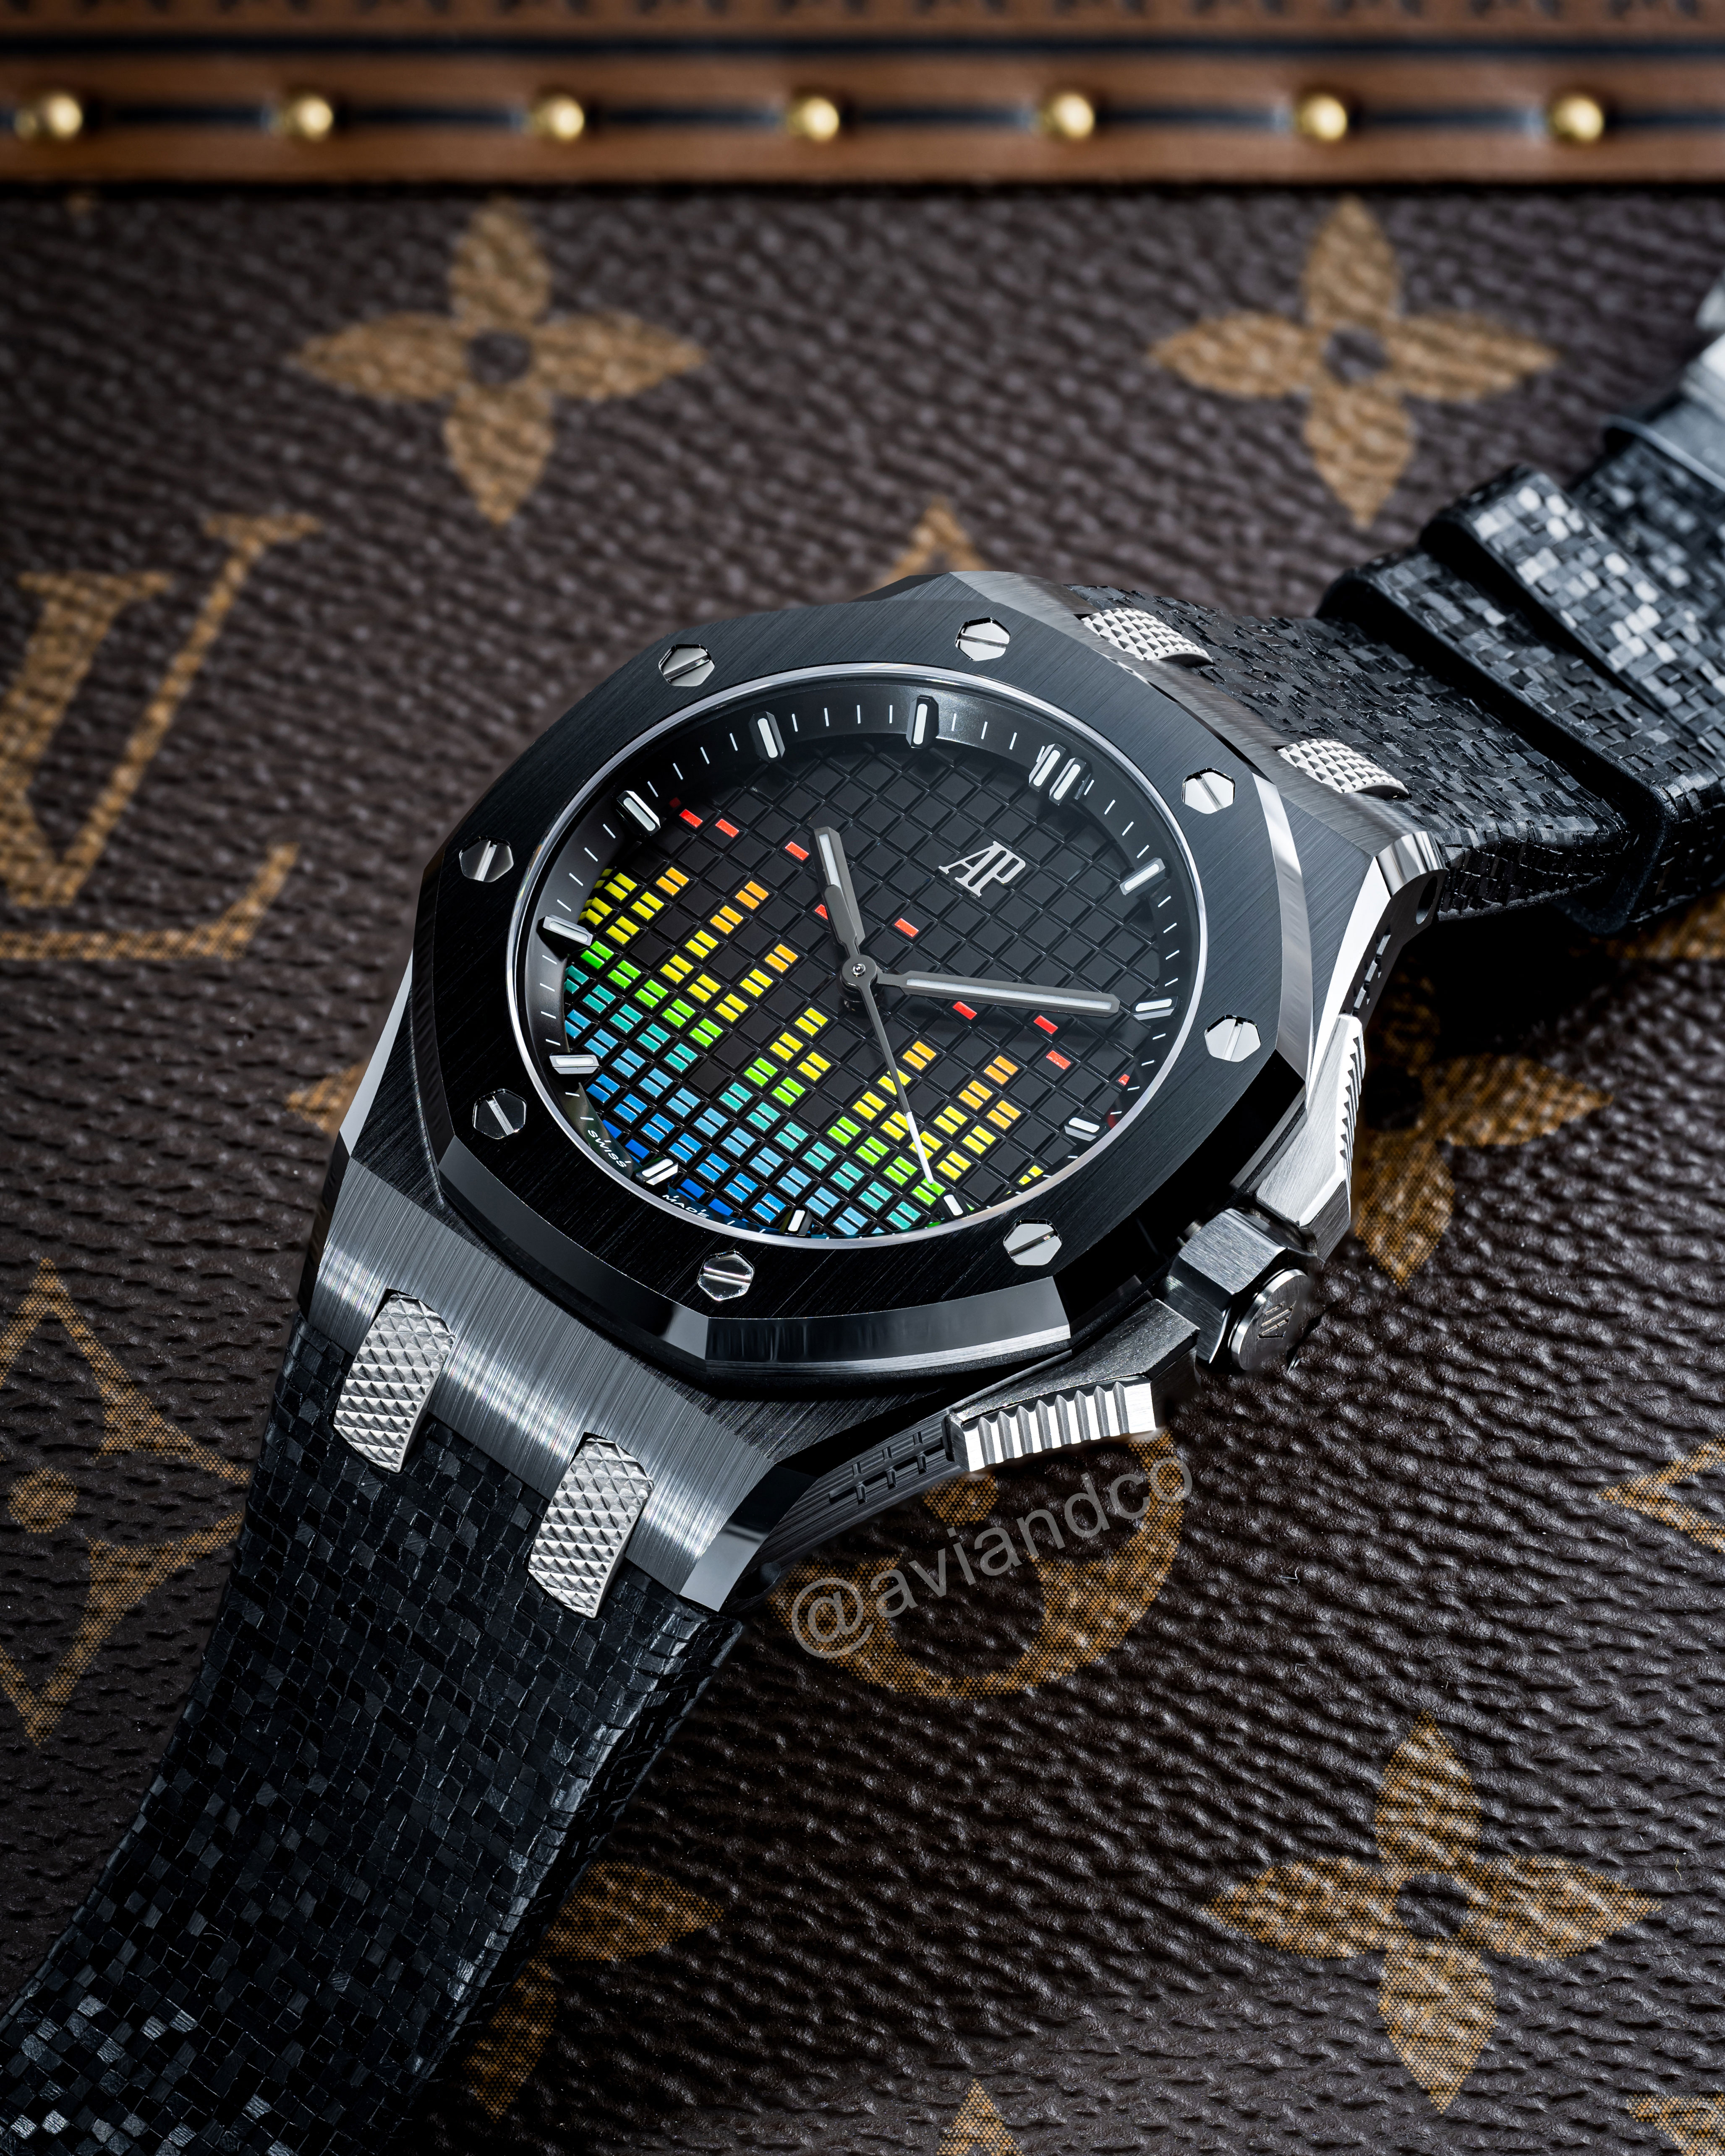 Black Ceramic Music Edition Timepiece with Black Rubber Strap Laid out on a Brown Louis Vuitton Background.